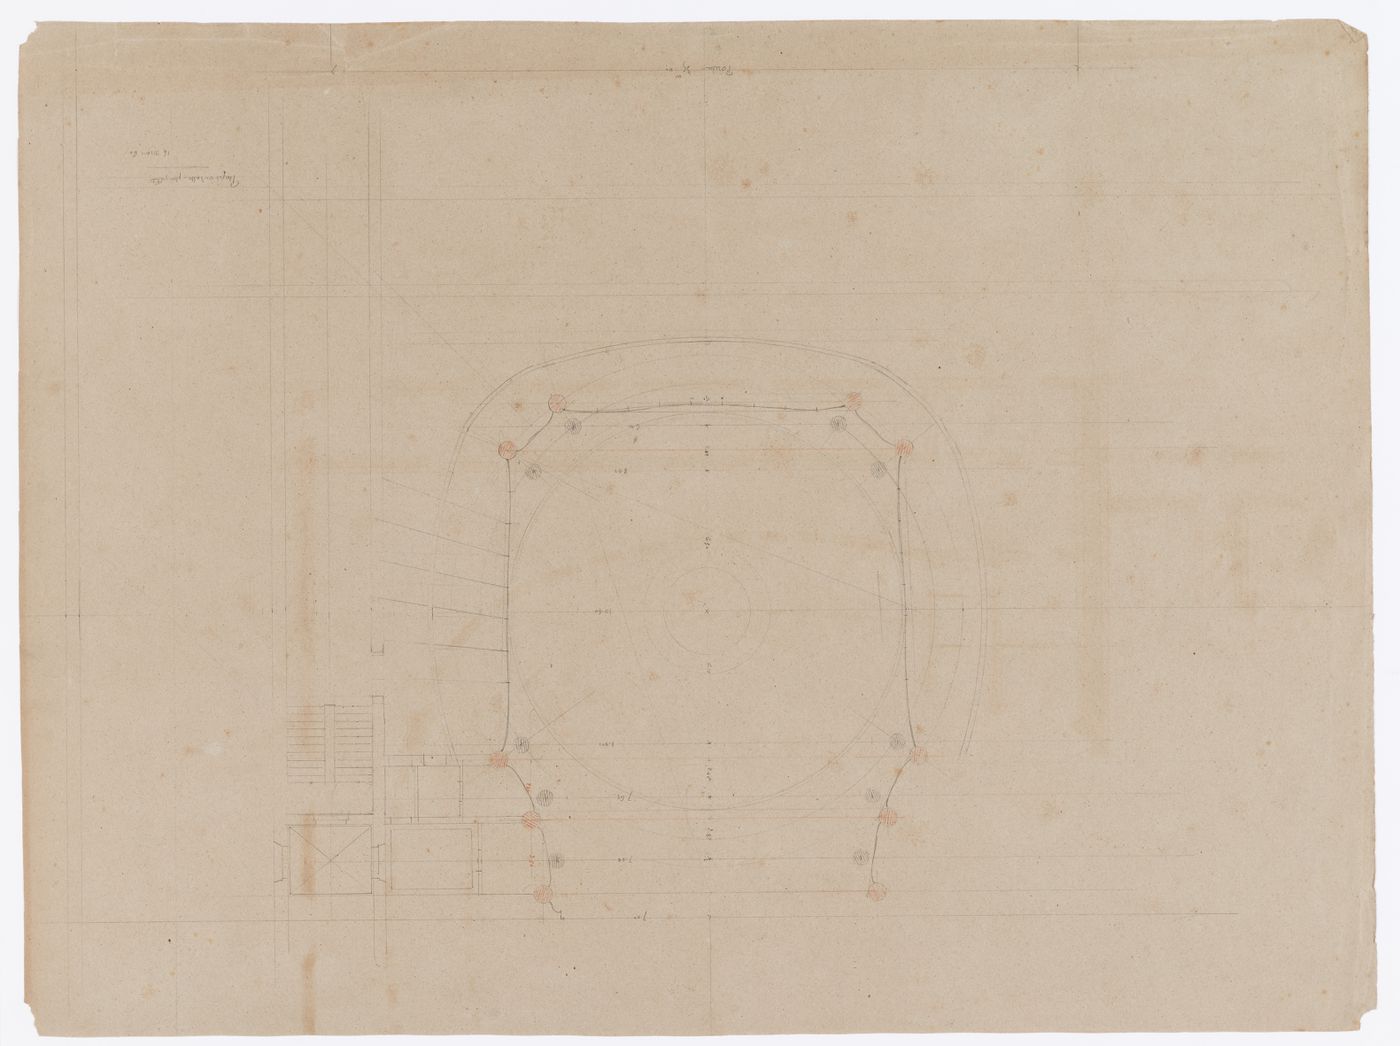 Project for an opera house for the Théâtre impérial de l'opéra: Sketch plan for the auditorium, possibly an alternate design